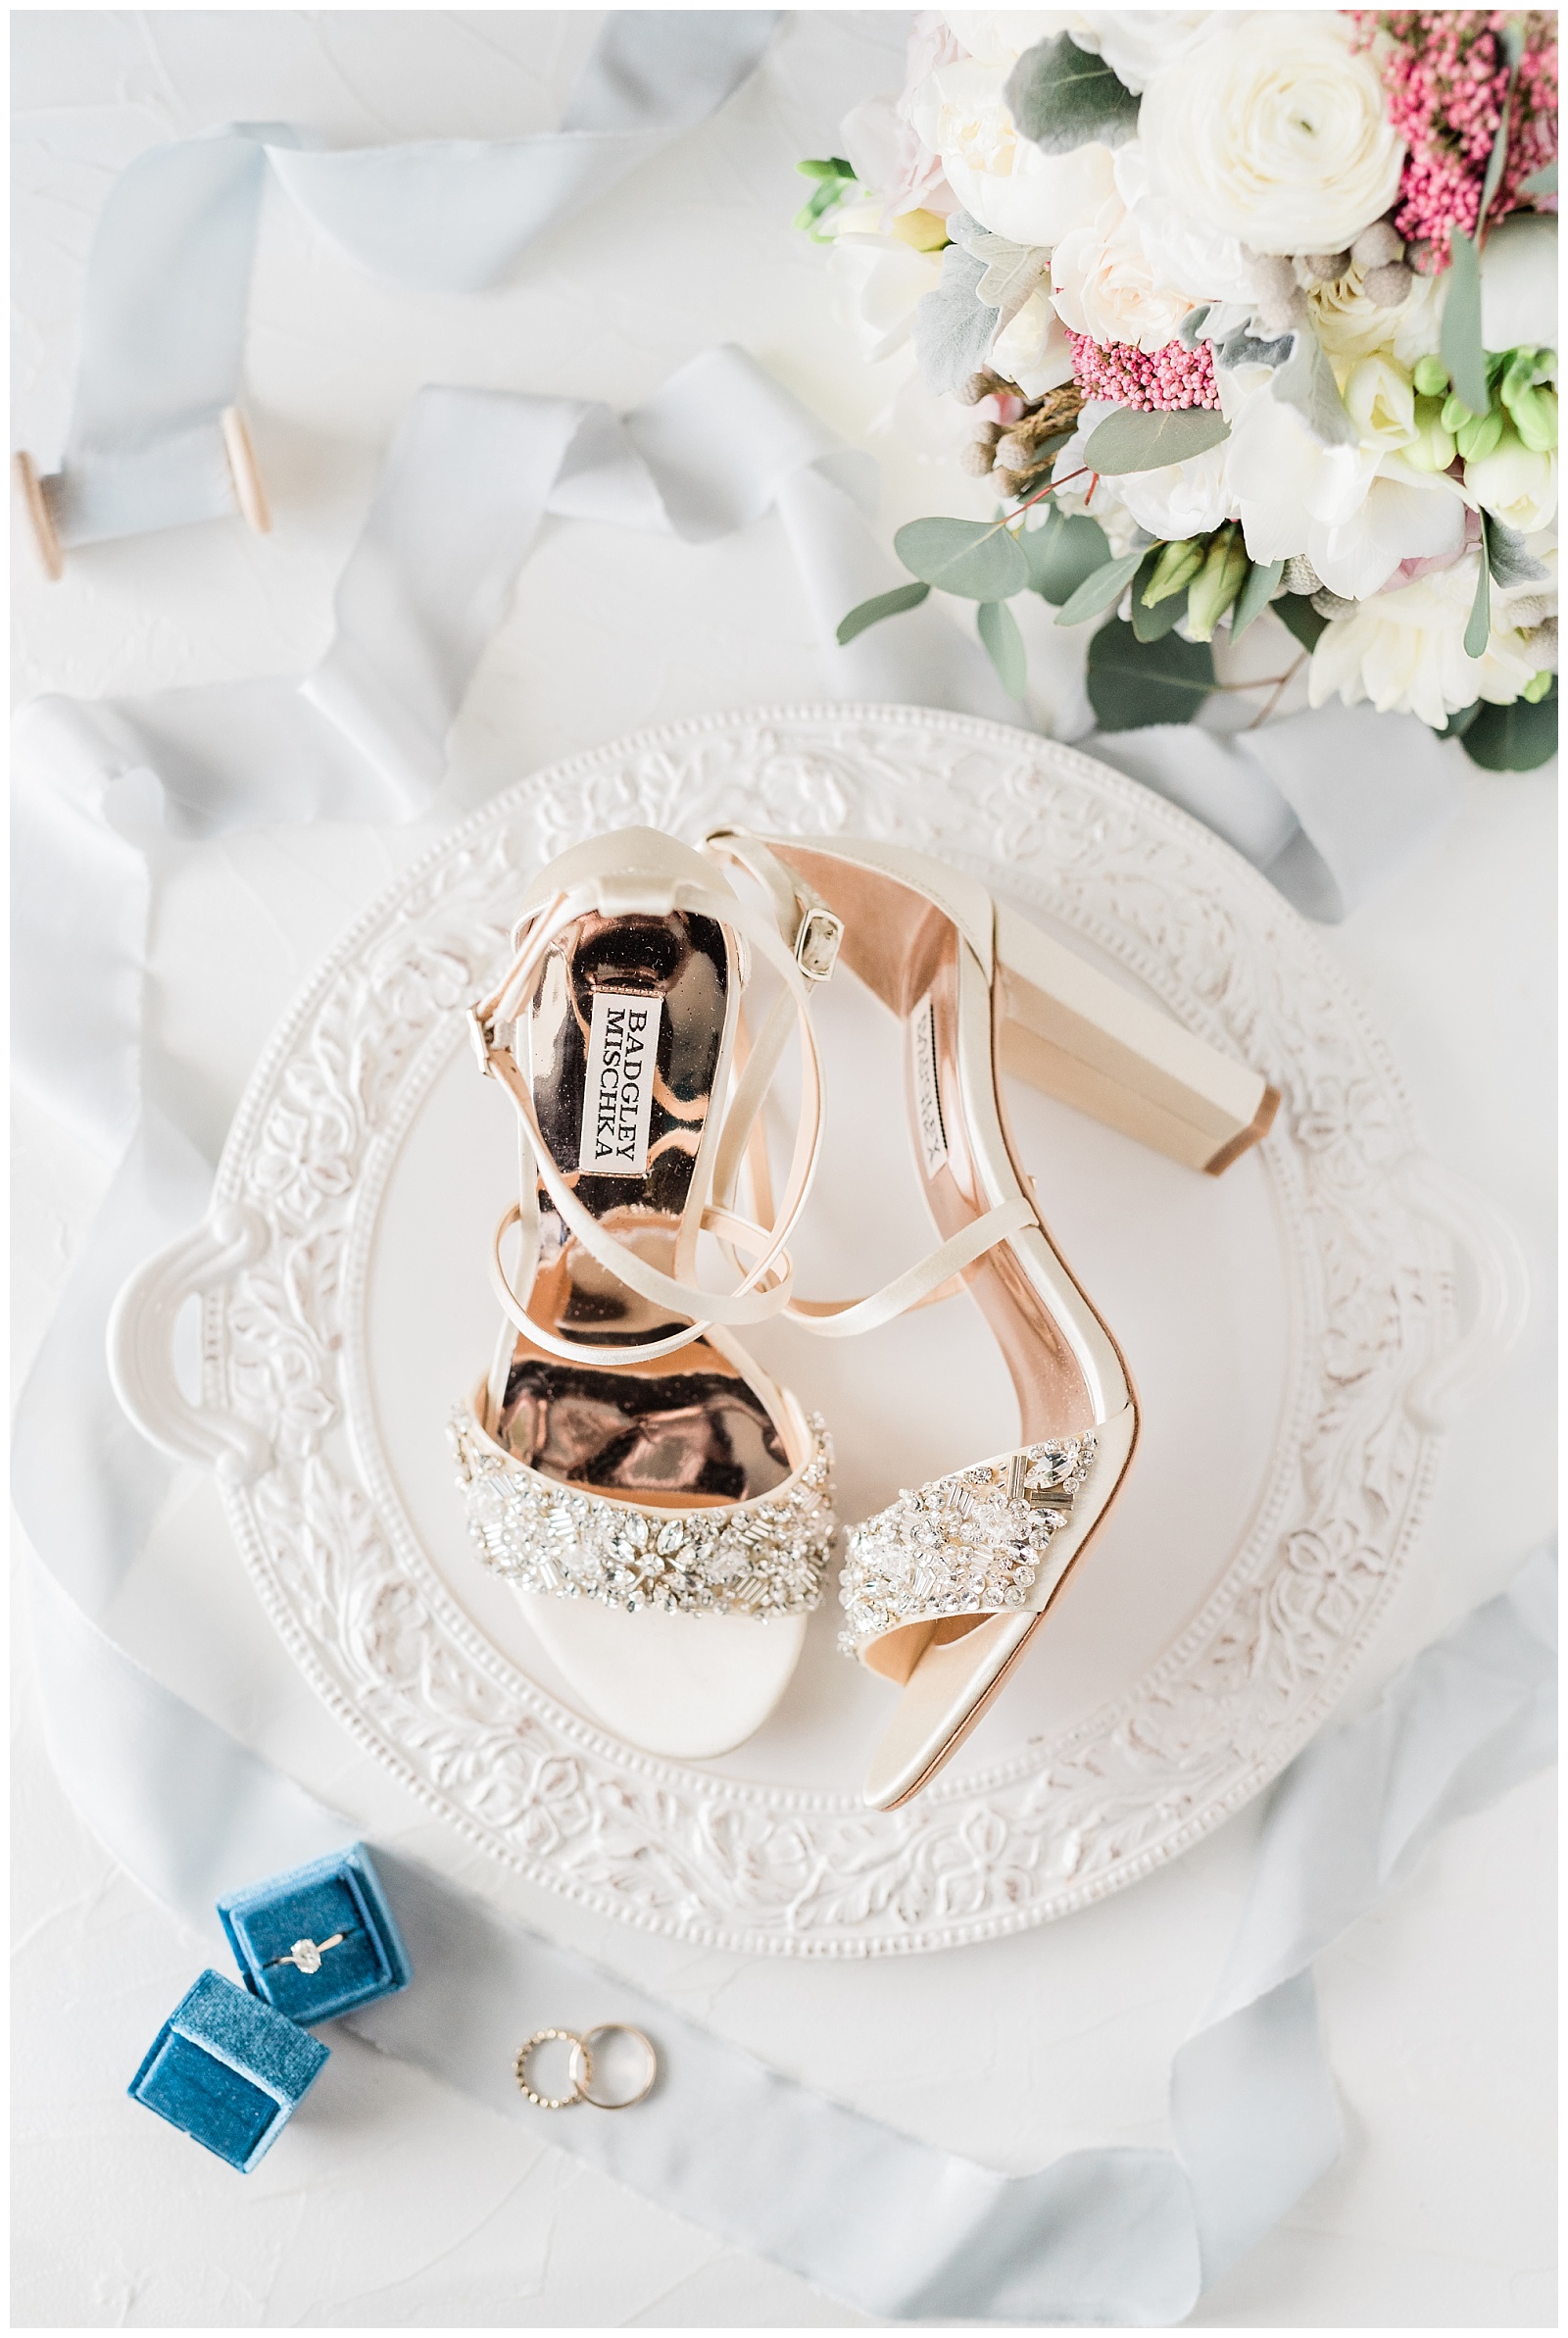 Badgley Mischka high heeled shoes styled on a white tray with flowers and a blue velvet ring box.